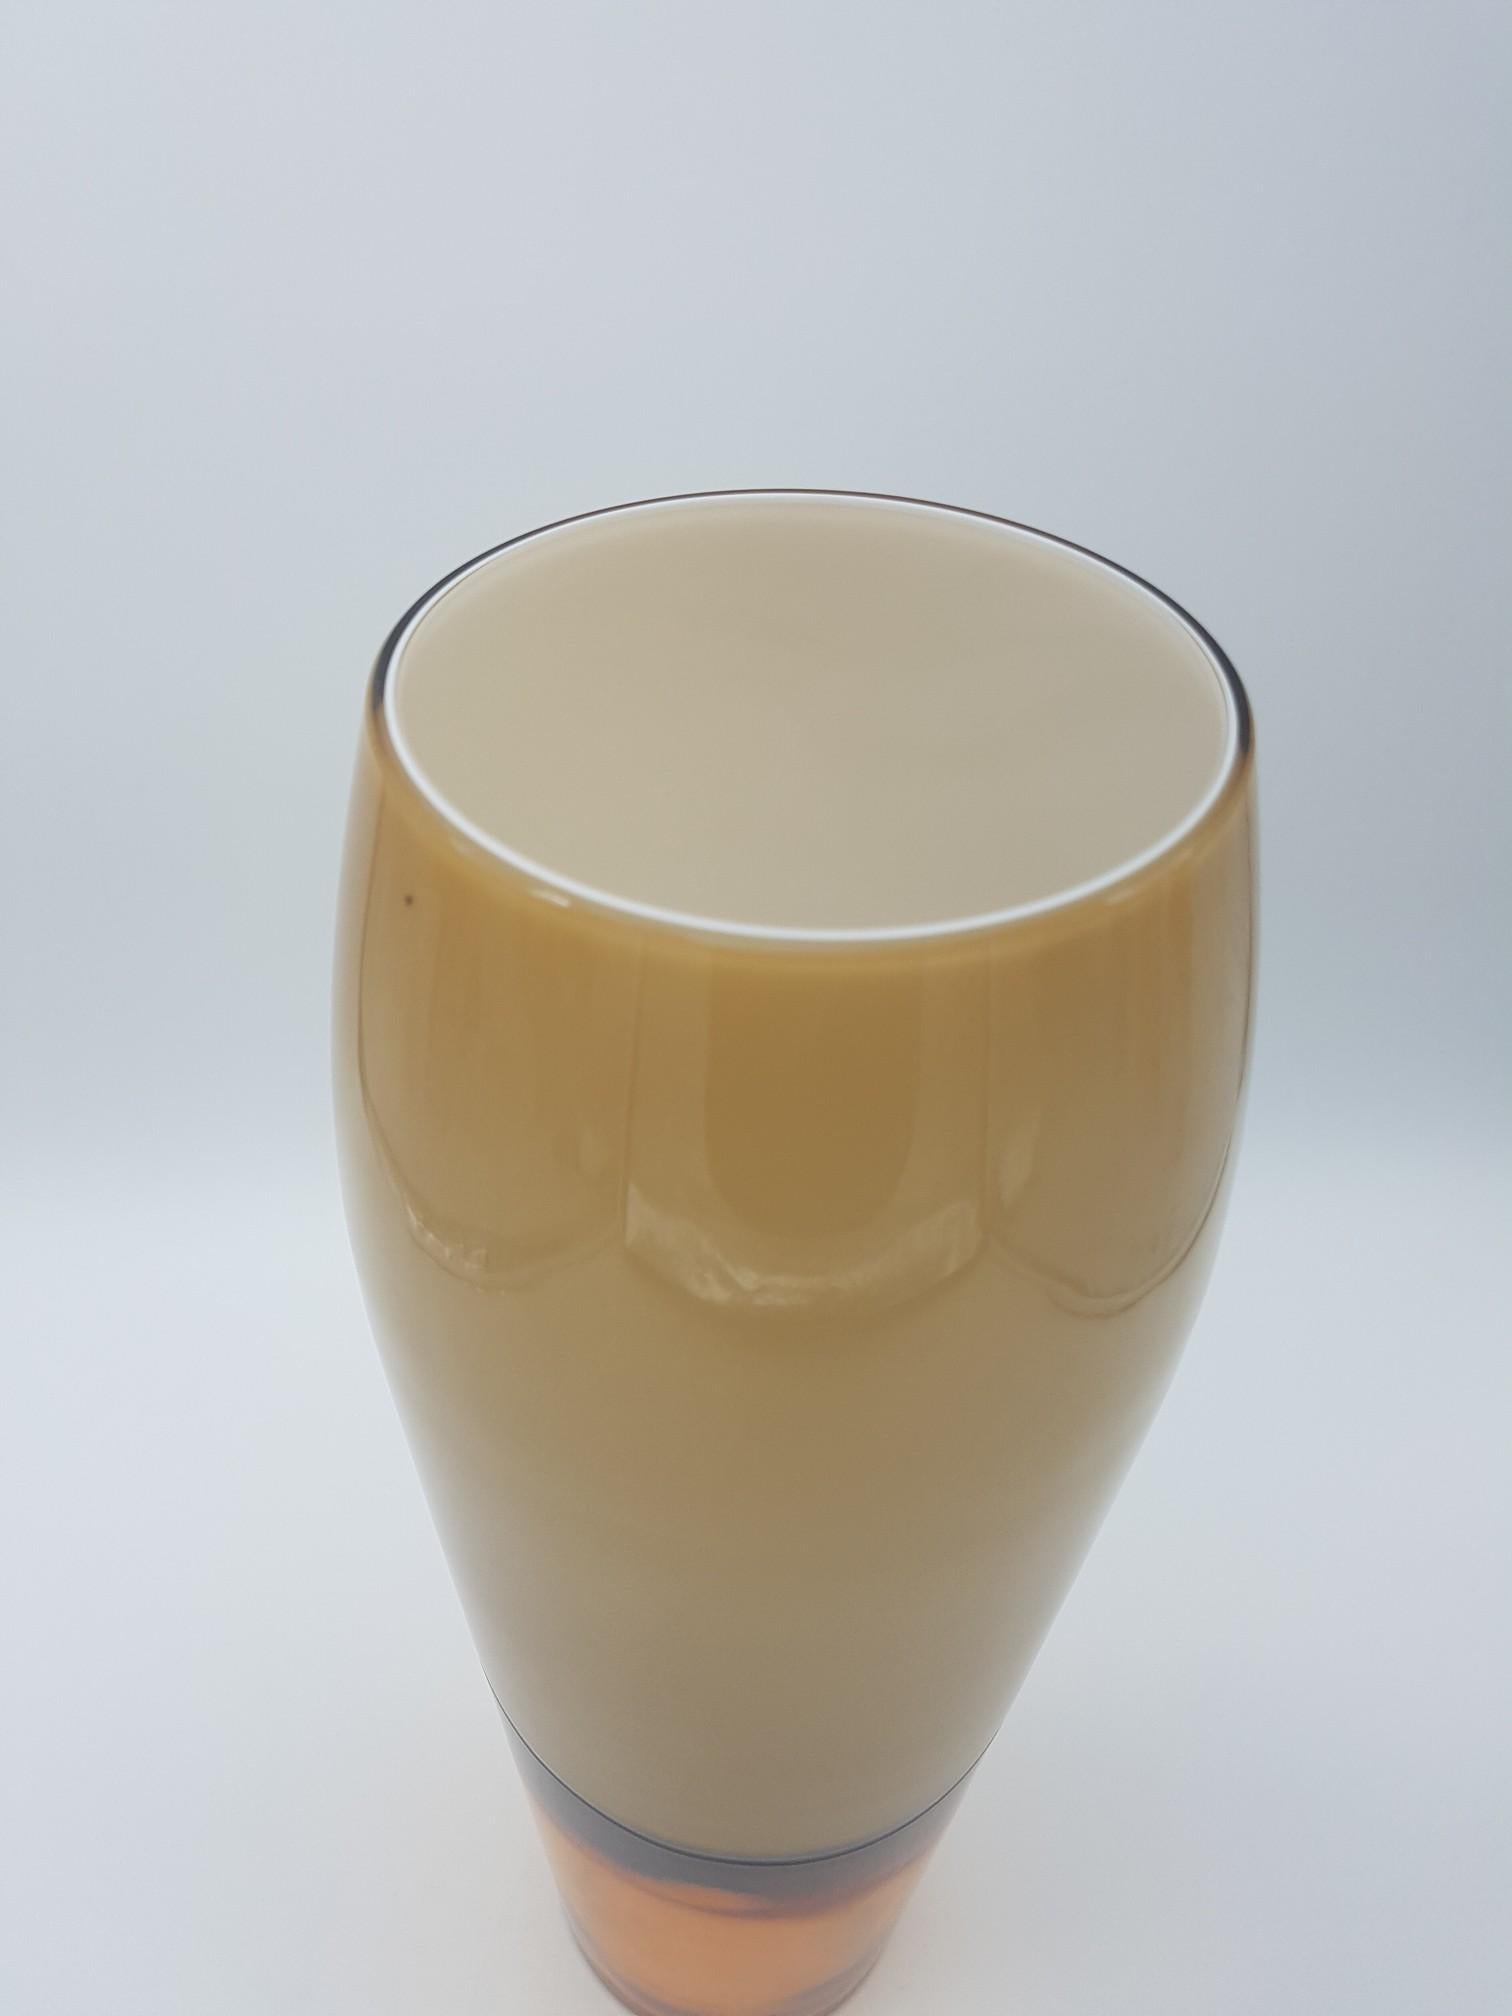 Modern Murano Glass Vase, Amber & Beige/Cream/Fawn Color 'Incalmo' by Cenedese For Sale 3